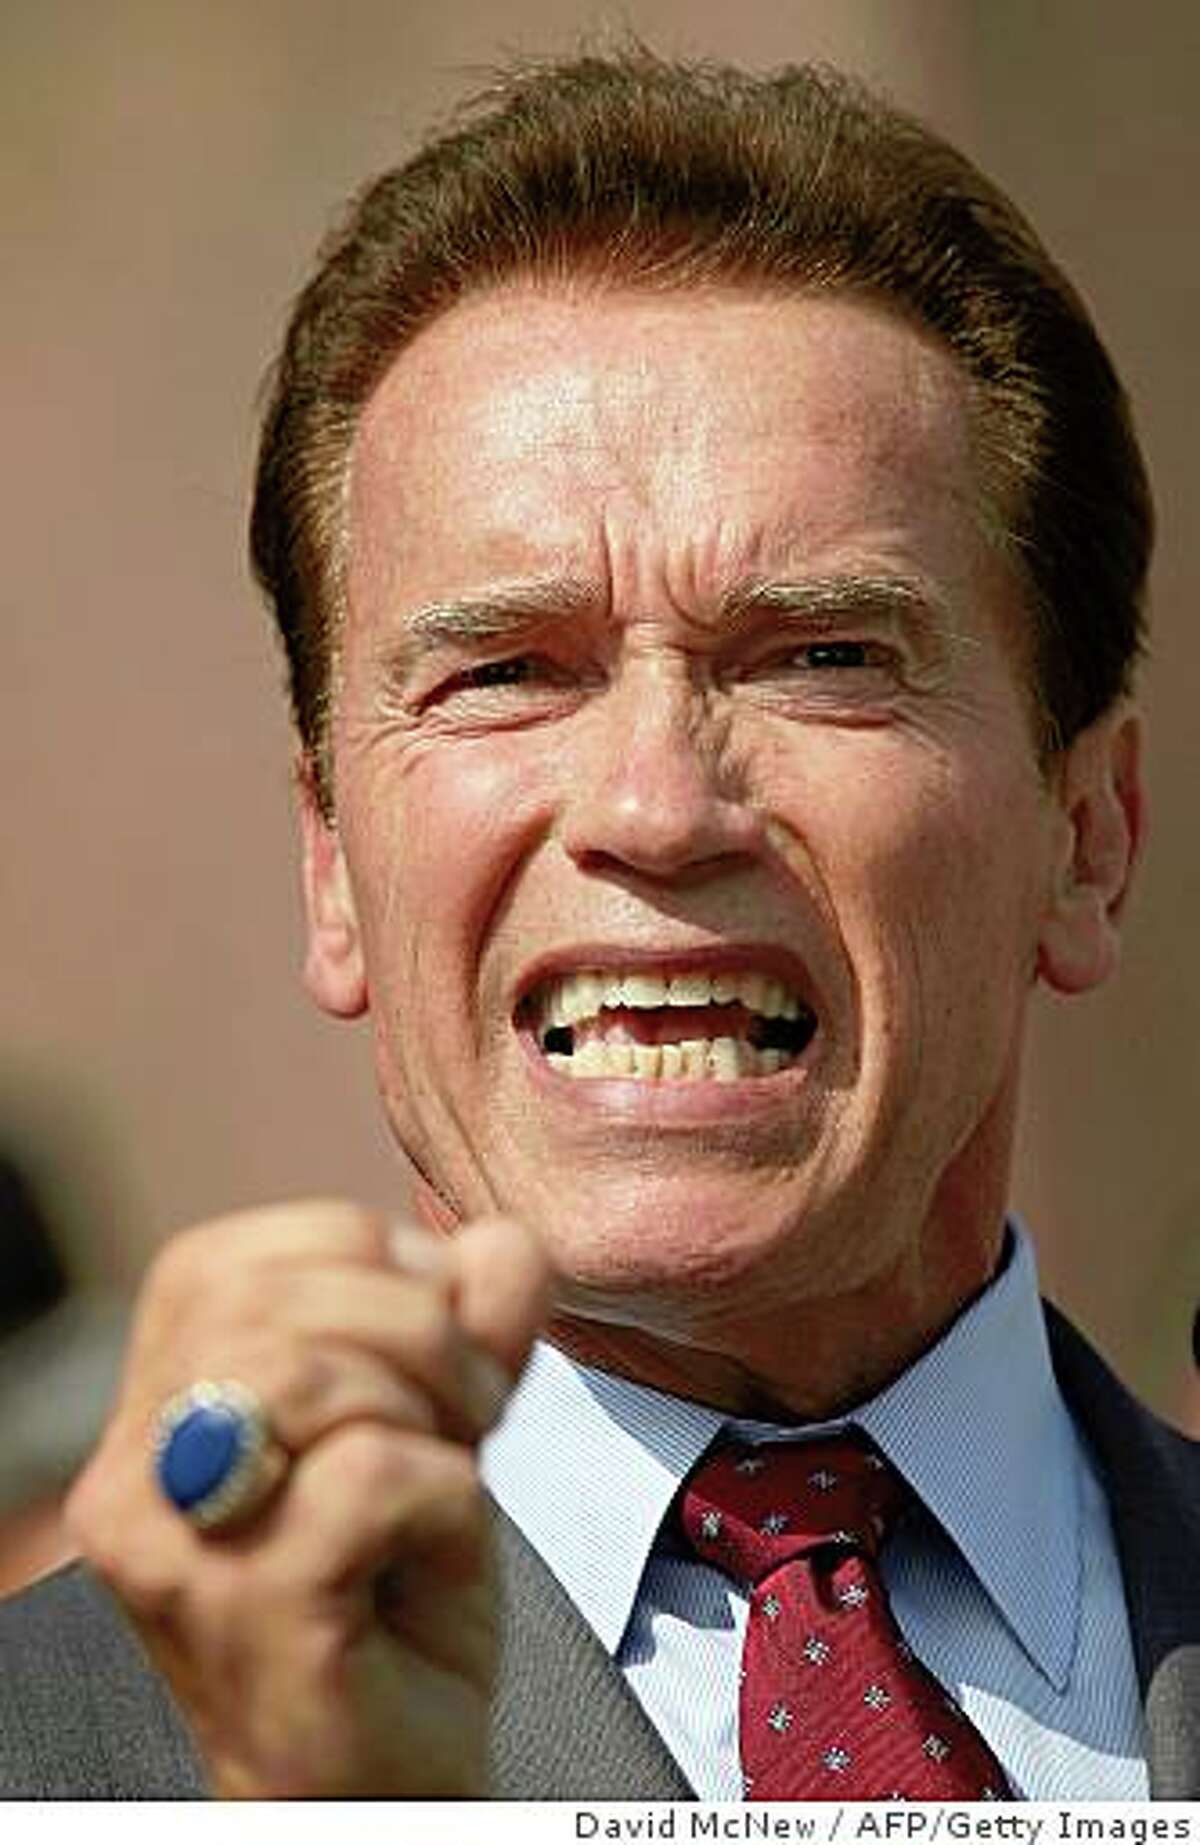 California Gov. Arnold Schwarzenegger attends a press conference with the California Contract Cities Association and the Independent Cities Association in support of his California budget proposal on August 27, 2008 in Los Angeles, California. Schwarzenegger is scheduled to speak at the Republican National Convention but said he may cancel as law makers continue to struggle with a budget deadlock that the governor said could be the longest in state history. California Assembly Speaker Karen Bass had previously planned to not hold sessions for three days, allowing fellow Democrats to participate in the Democratic National Convention, but has decided to continue holding sessions all week. Hundreds of bills await votes as the state budget impasse drags on. David McNew/Getty Images/AFP = FOR NEWSPAPERS, INTERNET, TELCOS AND TELEVISION USE ONLY = (Photo credit should read DAVID MCNEW/AFP/Getty Images)